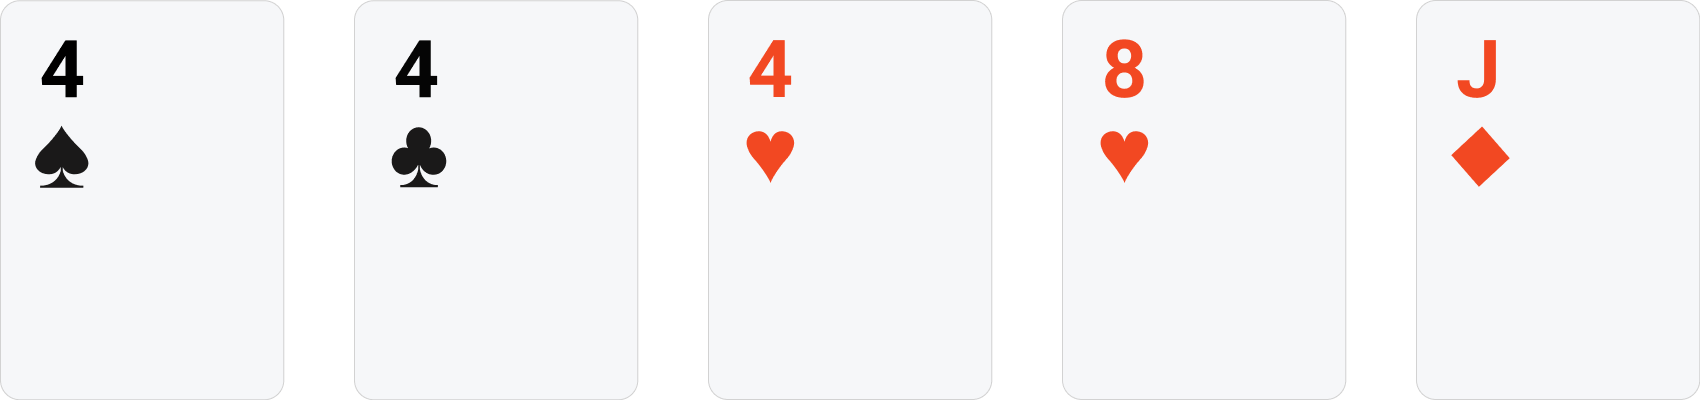 Three of a kind poker example